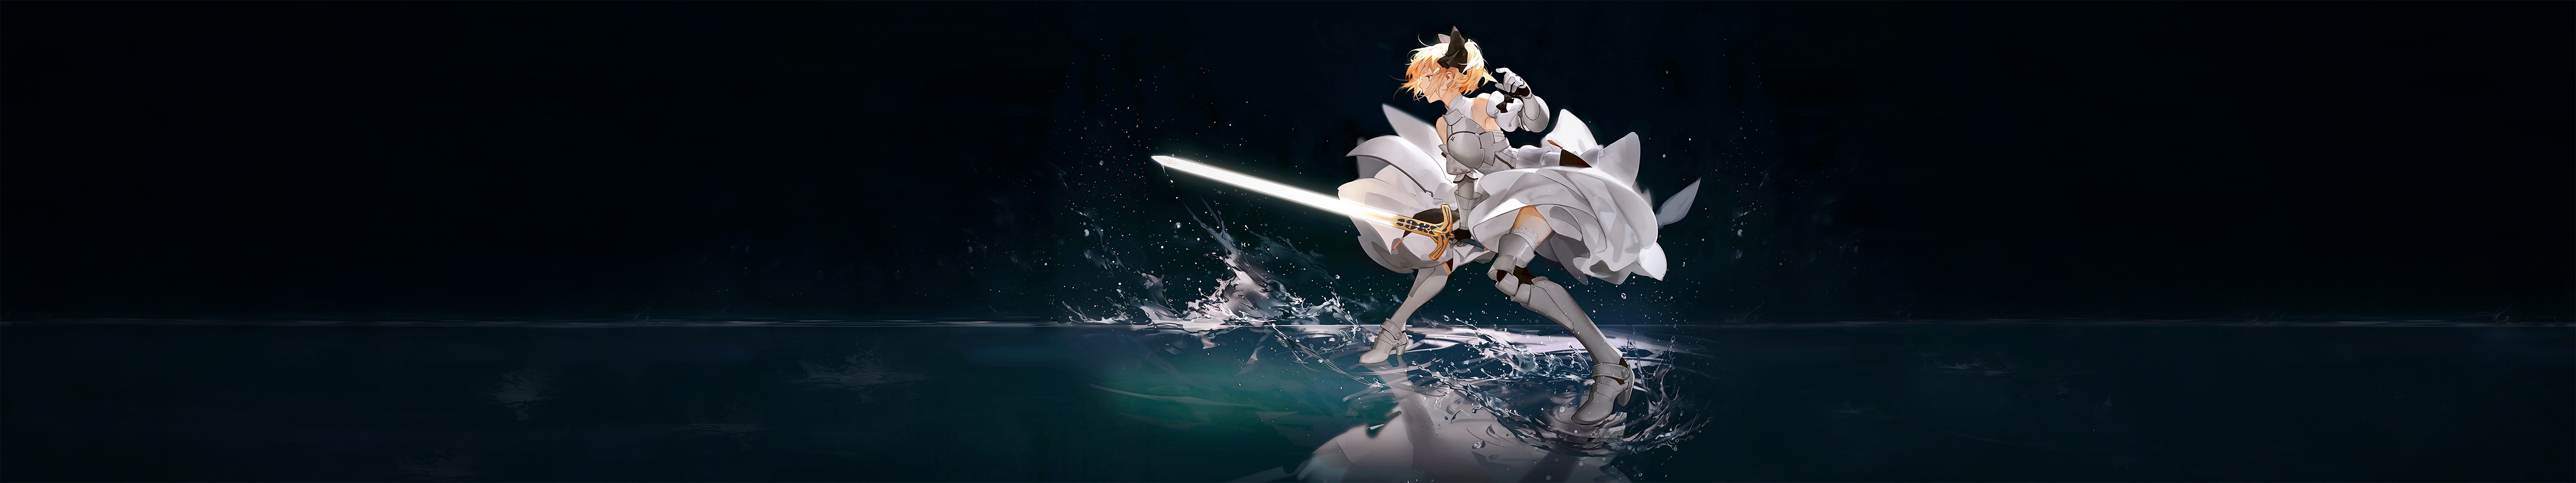 Fate Series, Anime Girls, Blonde, Saber Lily, Women With Swords, Triple Screen Wallpaper